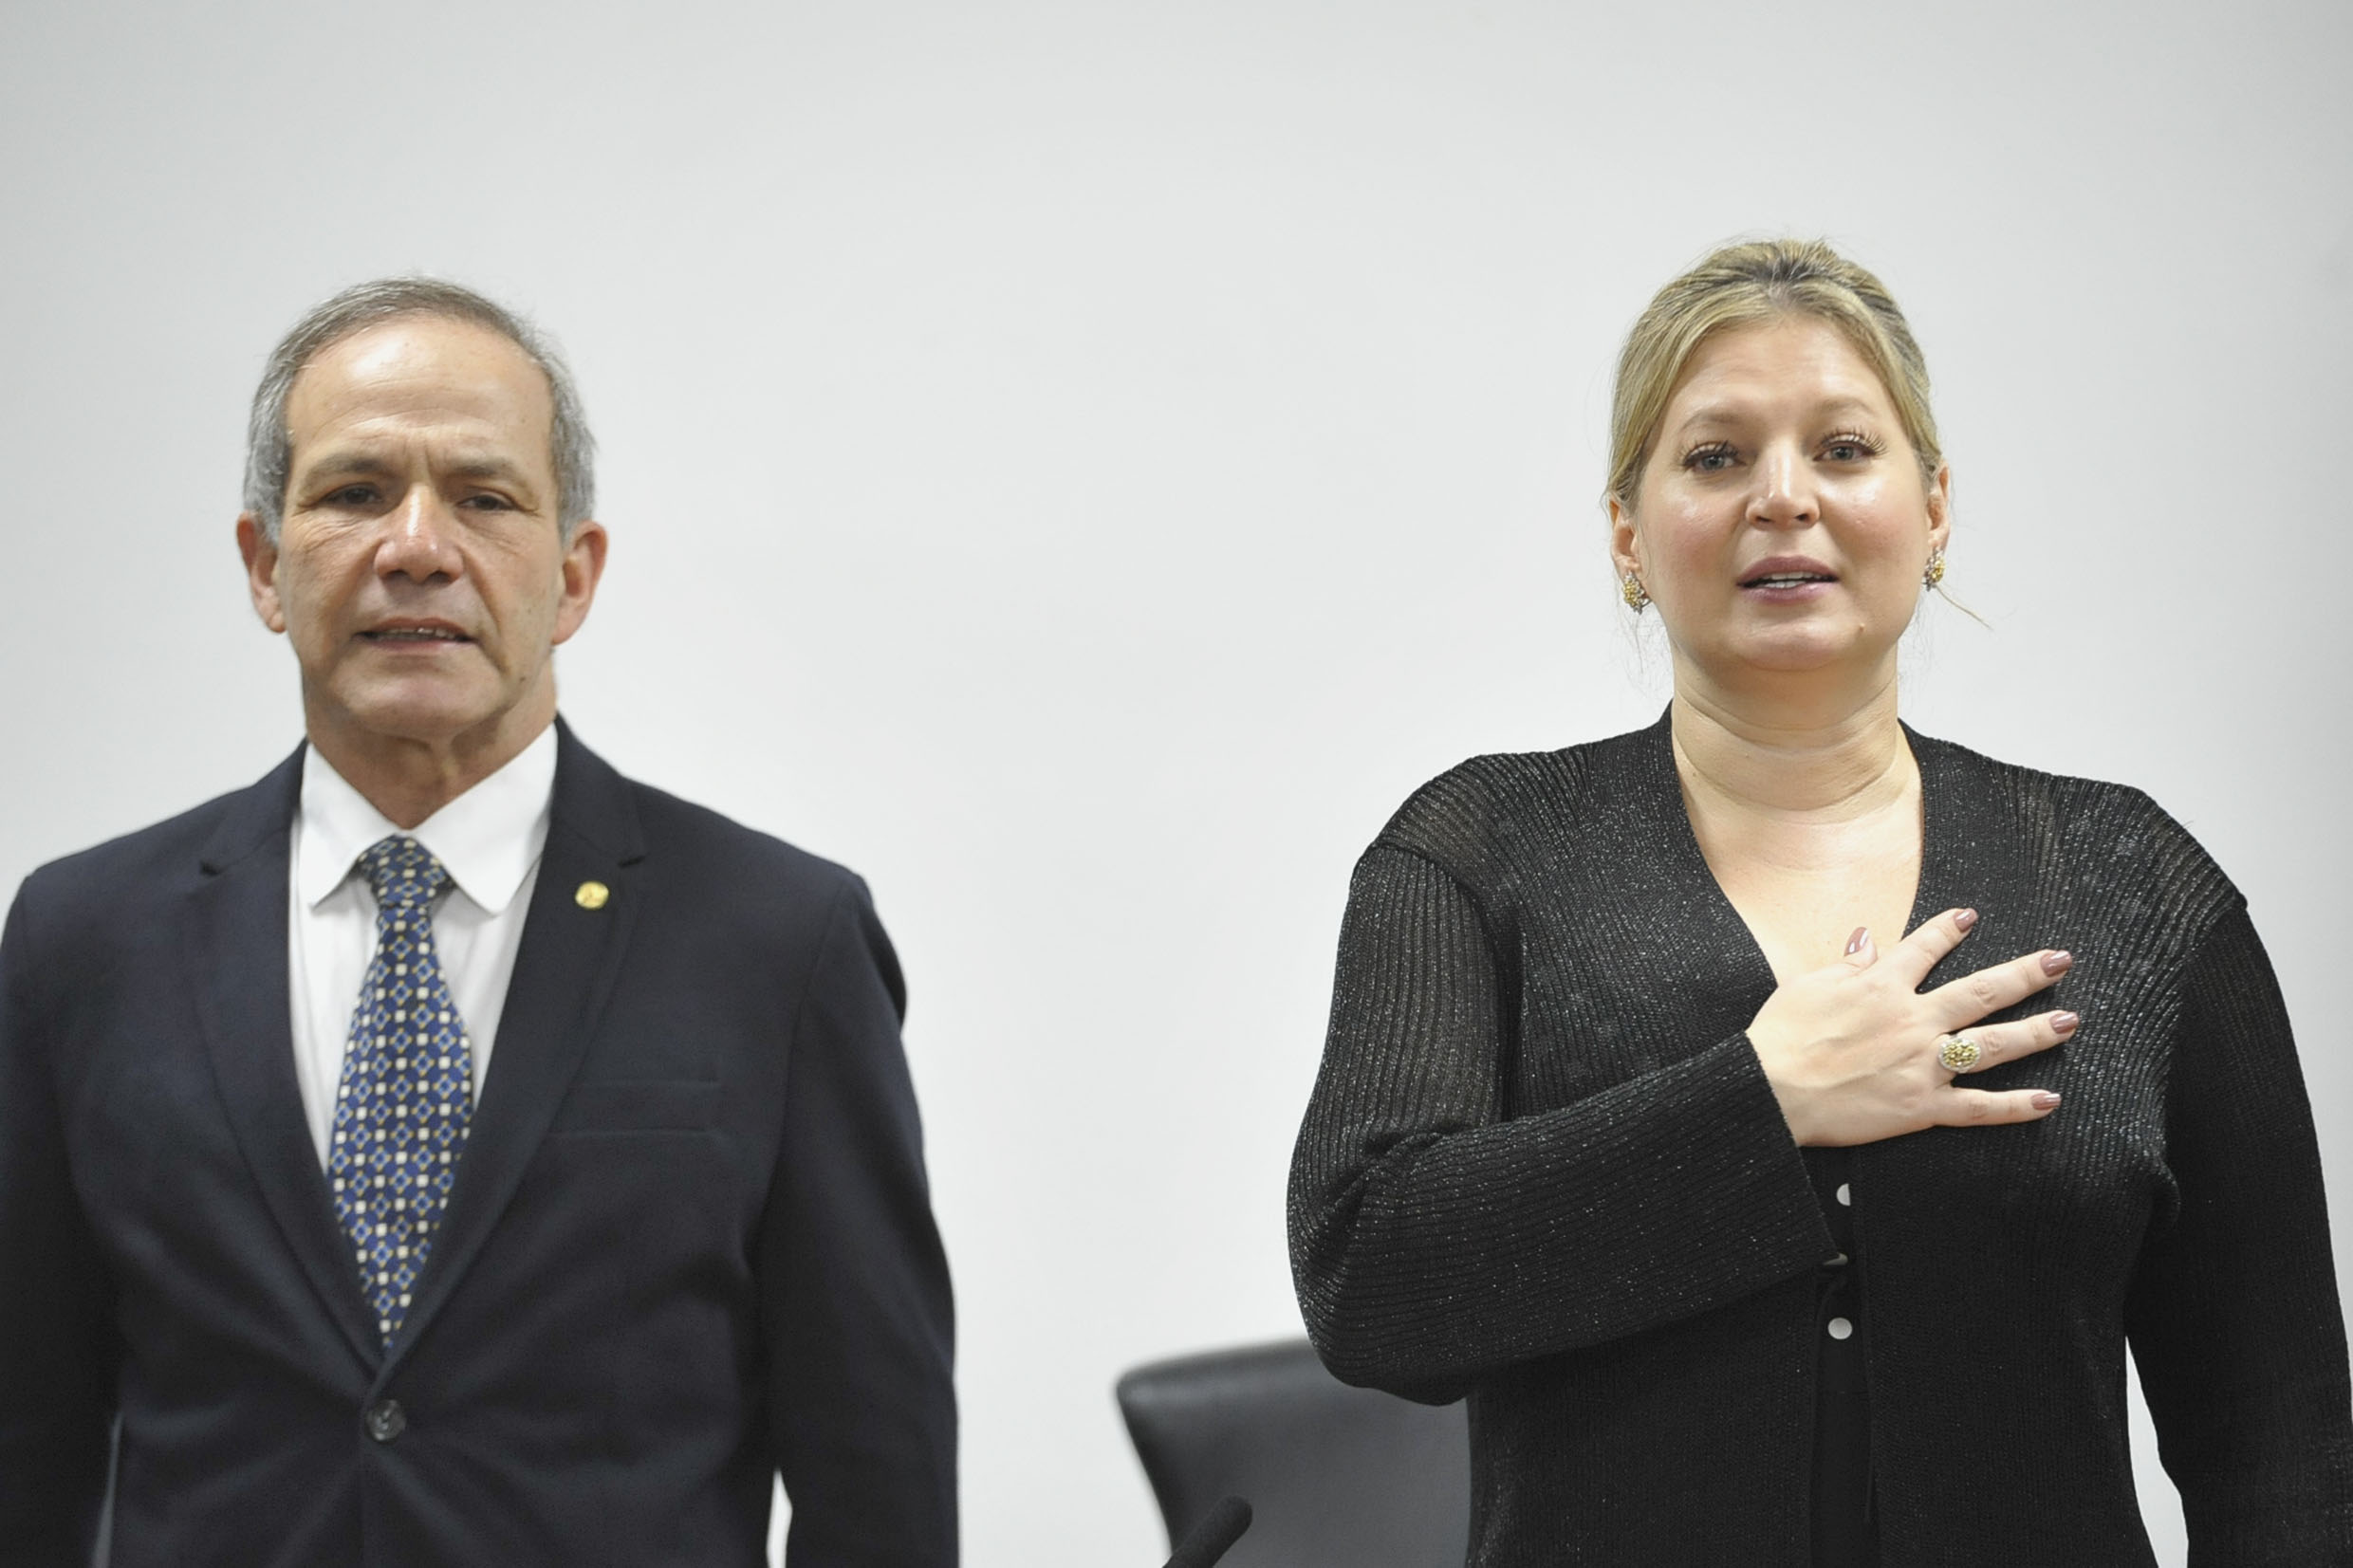 General Peternelli e Joice Hasselmann<a style='float:right;color:#ccc' href='https://www3.al.sp.gov.br/repositorio/noticia/N-08-2019/fg238672.jpg' target=_blank><i class='bi bi-zoom-in'></i> Clique para ver a imagem </a>